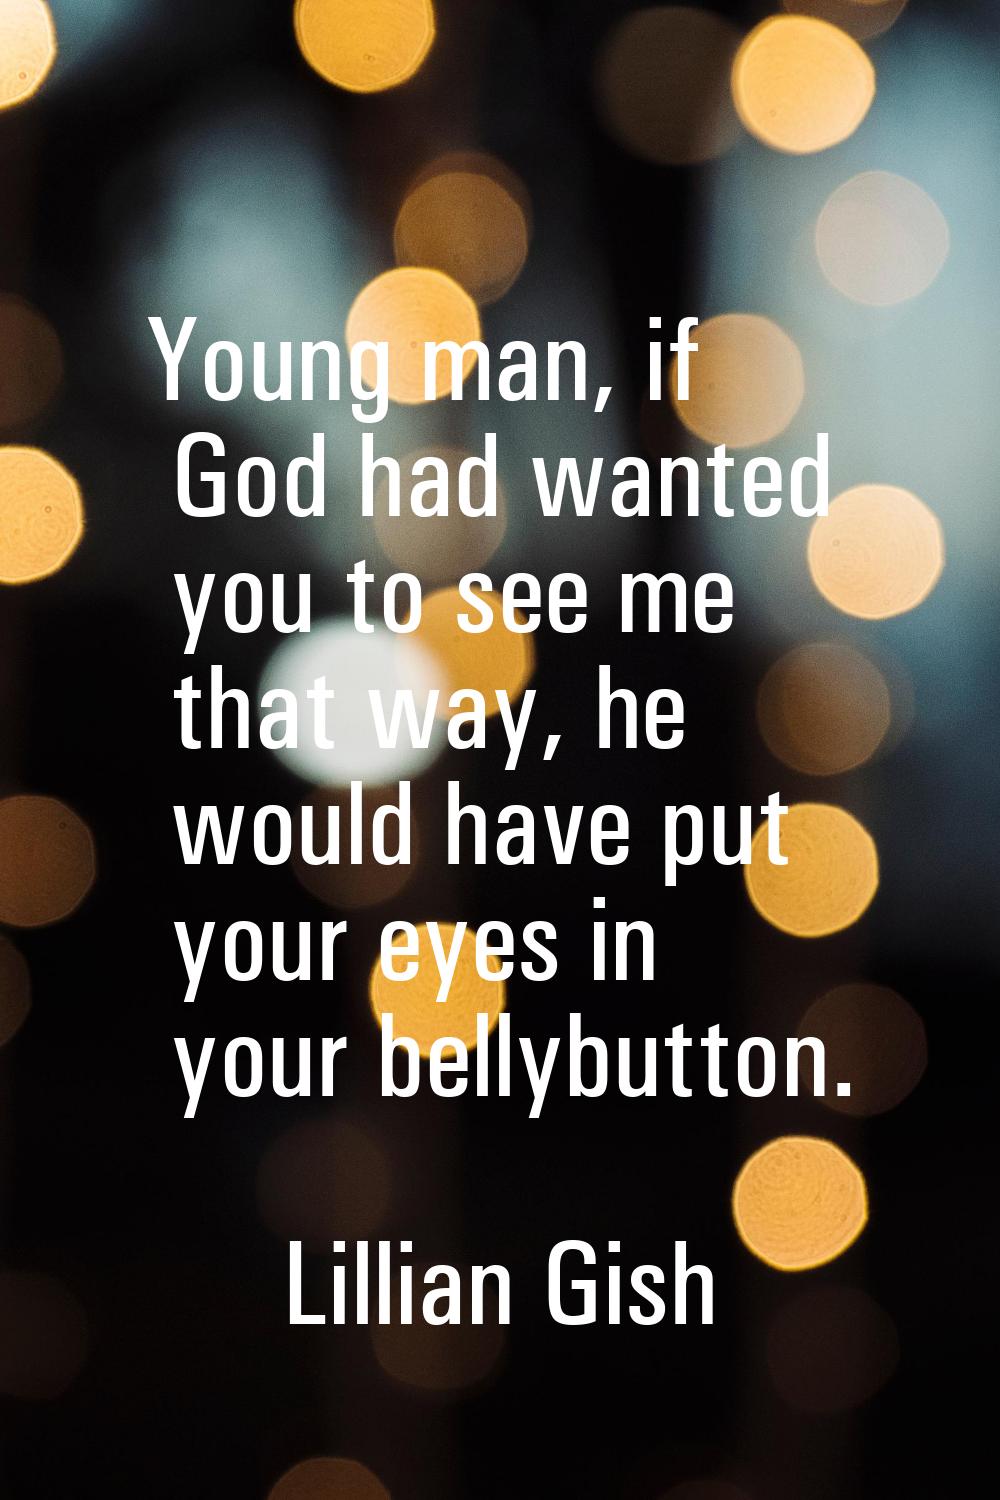 Young man, if God had wanted you to see me that way, he would have put your eyes in your bellybutto